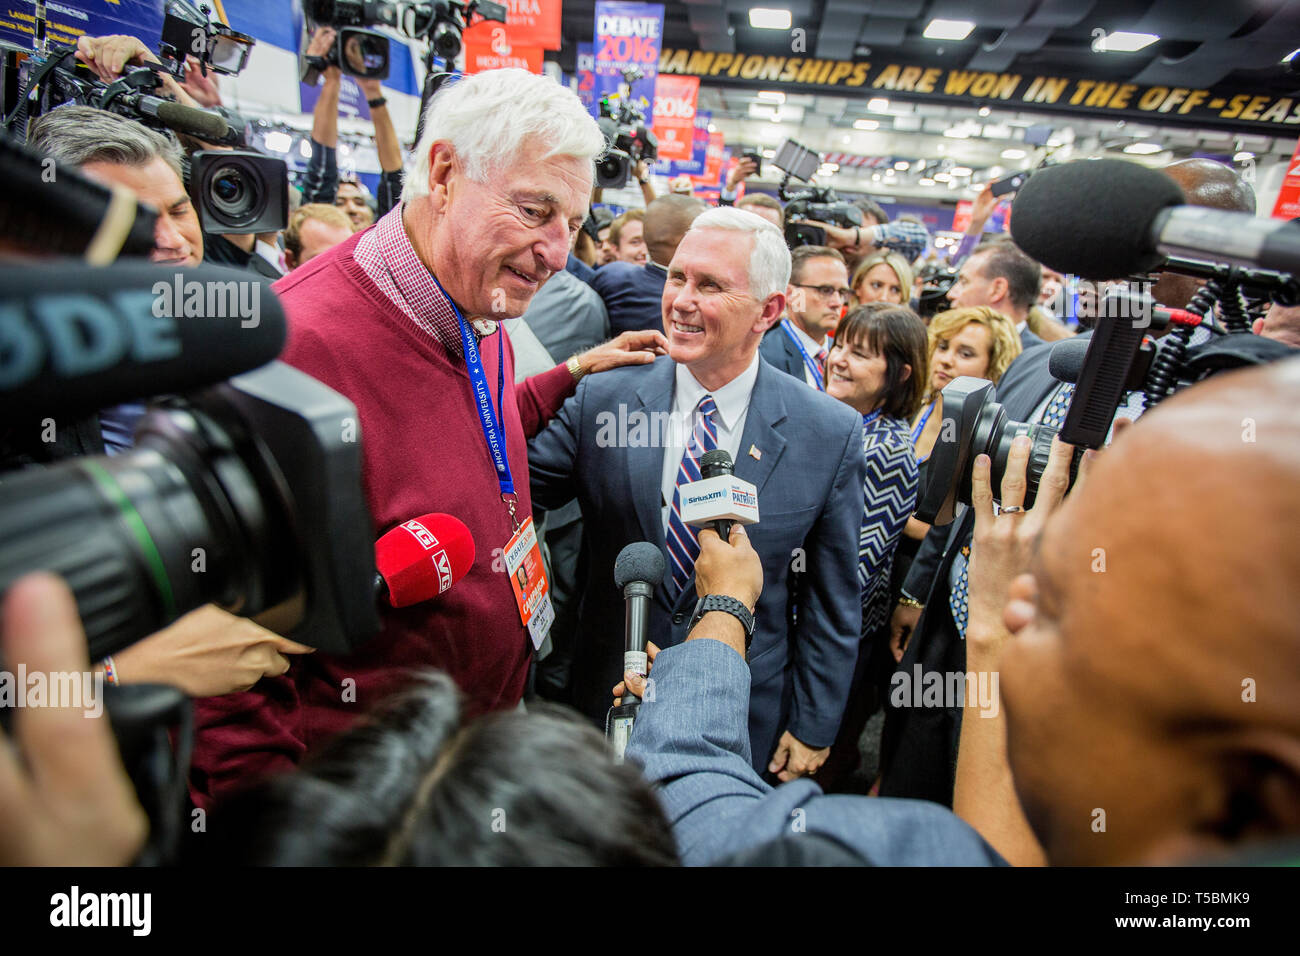 Bob Knight, a.k.a. 'The Coach', with Trumps running mate Mike Pence ahead of the debate. The Democrate and Republican nominees for US President, Hillary Rodham Clinton and Donald John Trump, met on Sep. 26th for the first head to head Presidential Debate at the Hofstra University in Long Island. Stock Photo